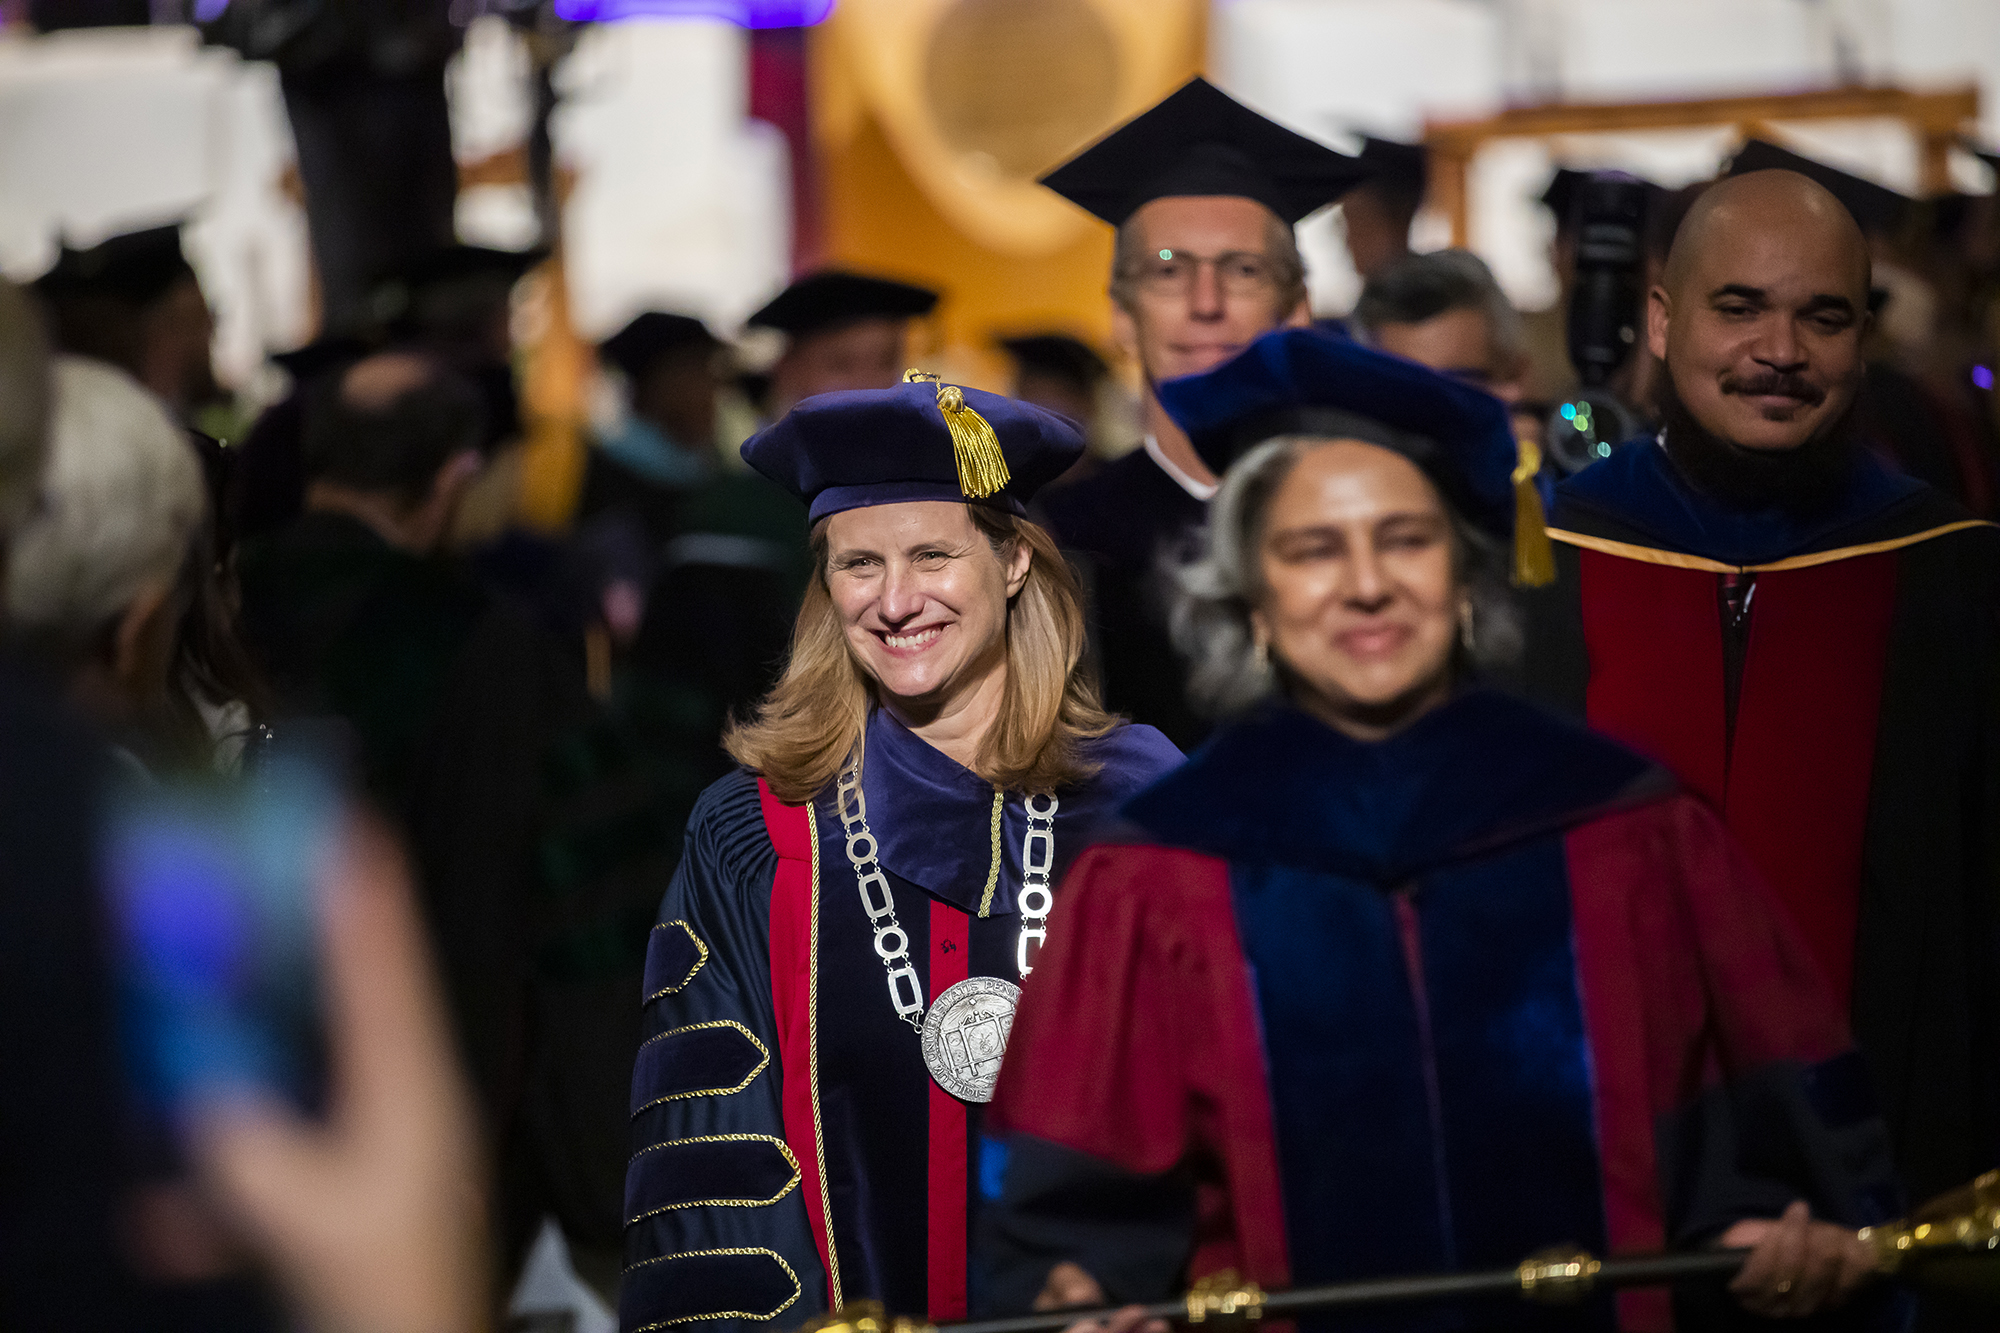 Liz Magill and others in a procession during Commencement.